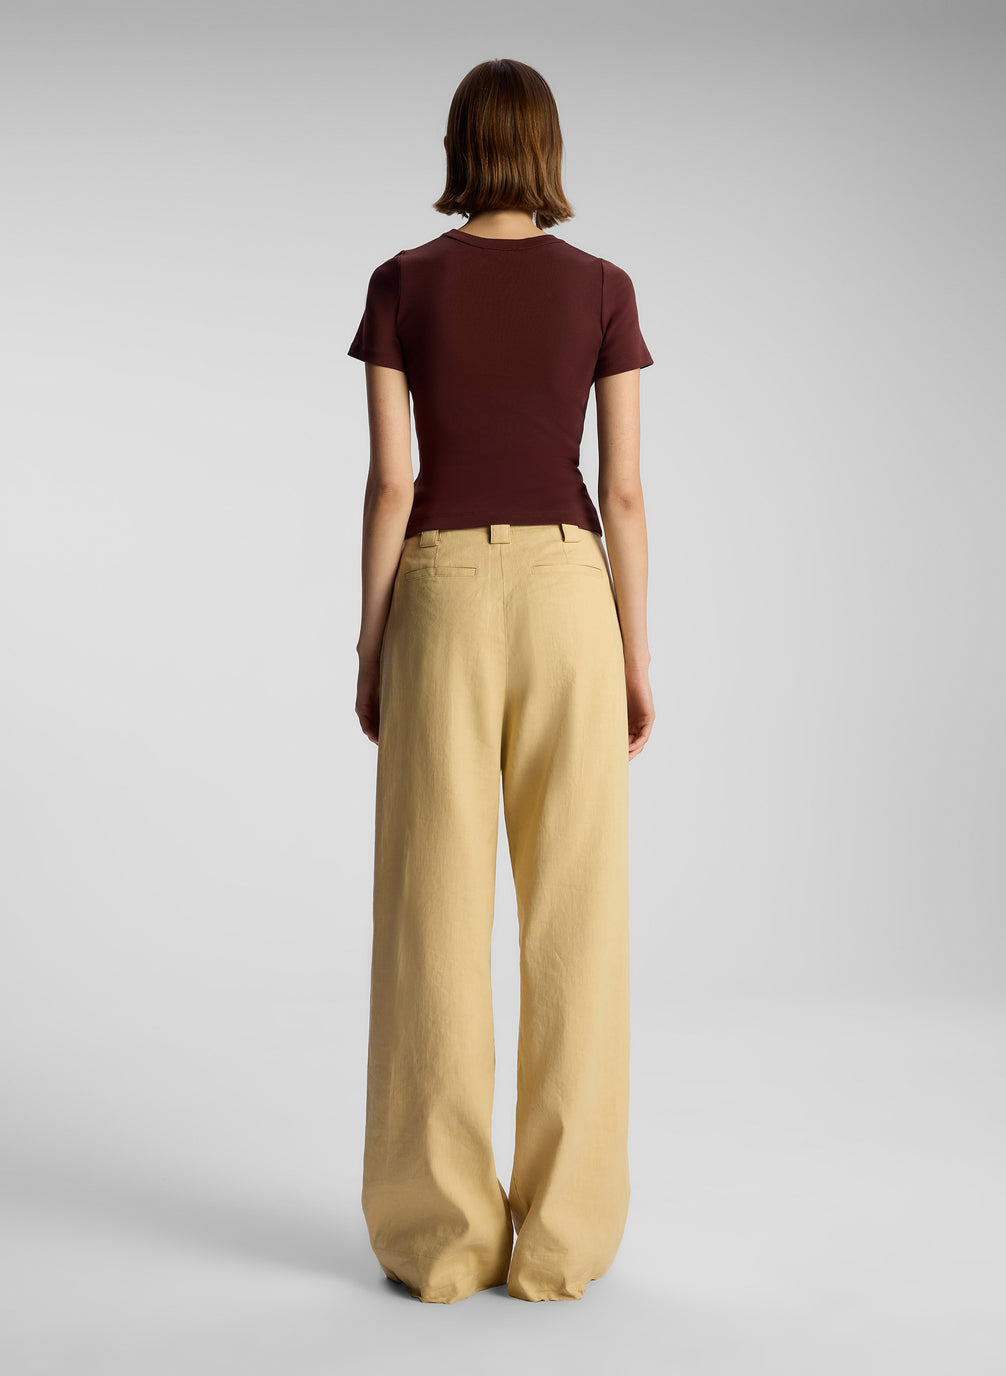 back view of woman wearing brown t shirt and tan pants